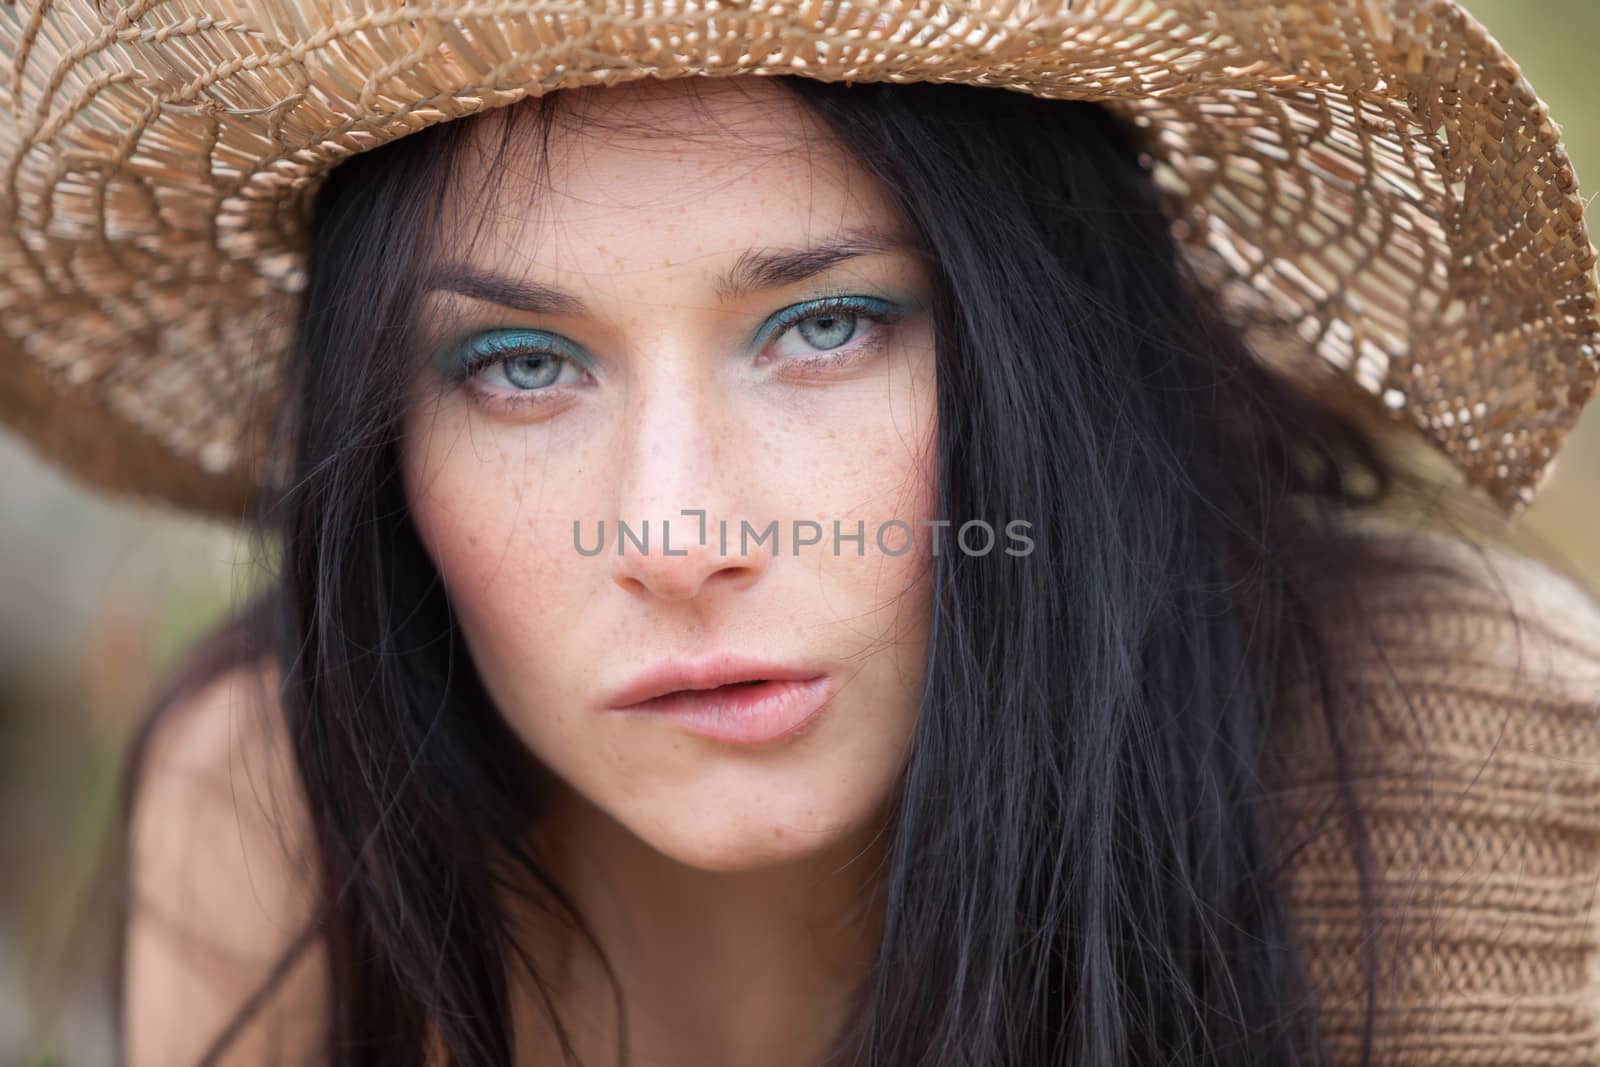 Portrait of a girl in straw hat against soft nature background